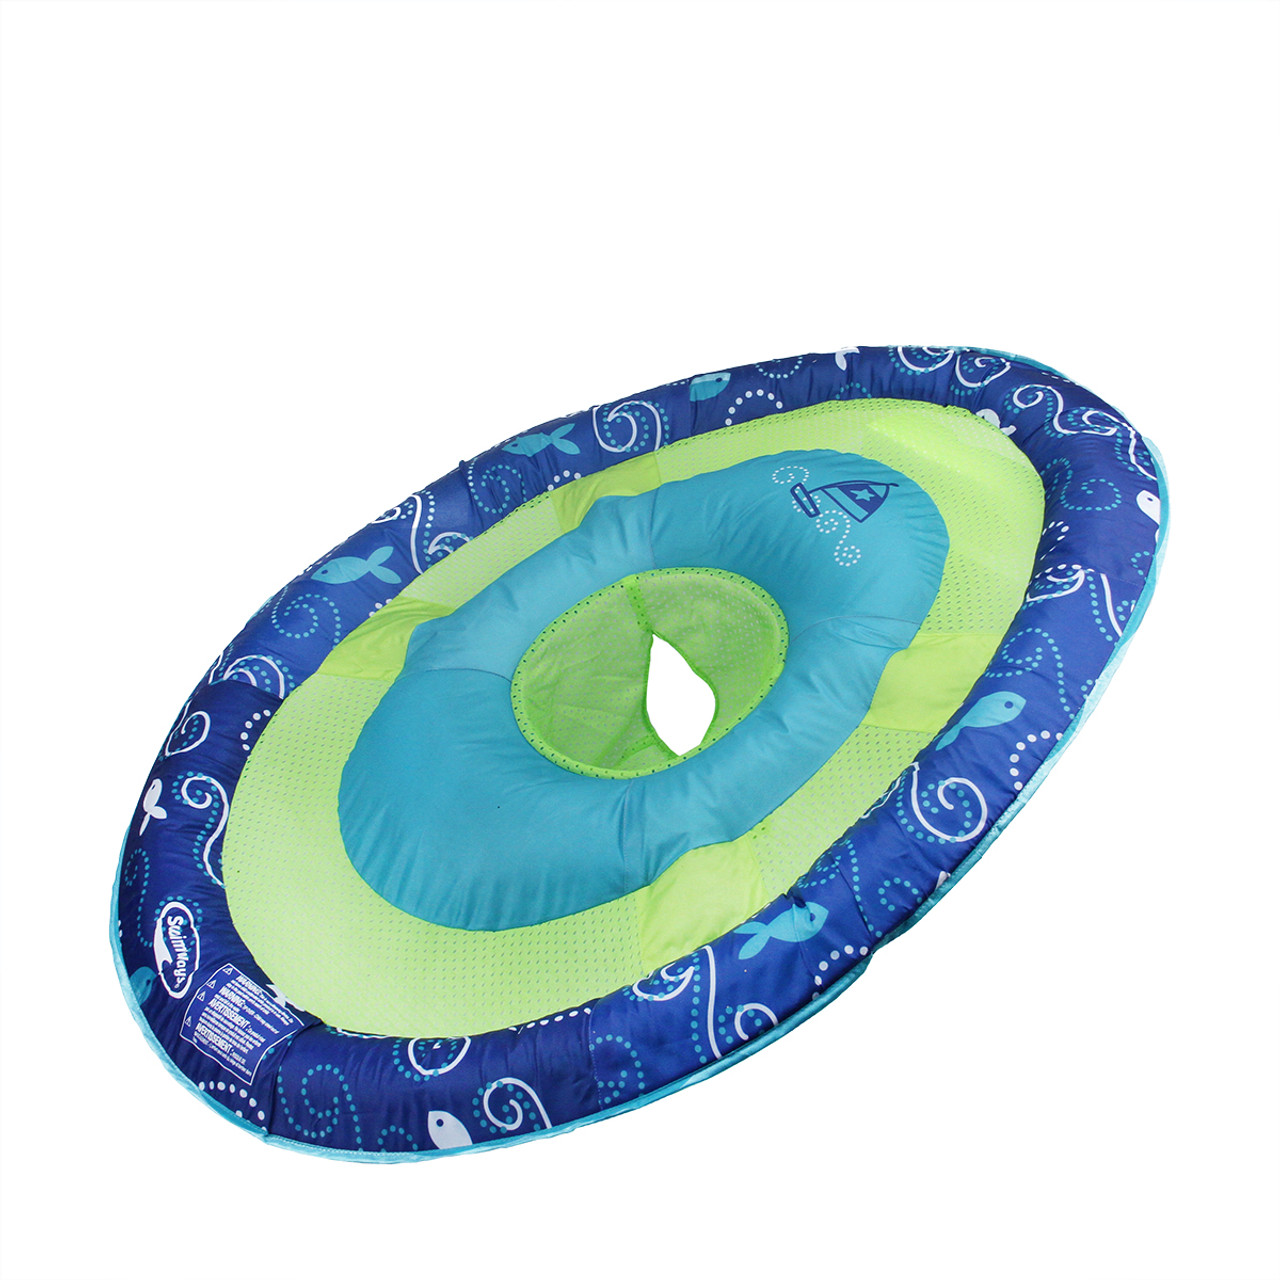 36 Navy, Aqua & Lime Fishy & Spiral Print Step 1 Inflatable Baby Spring Pool  Float